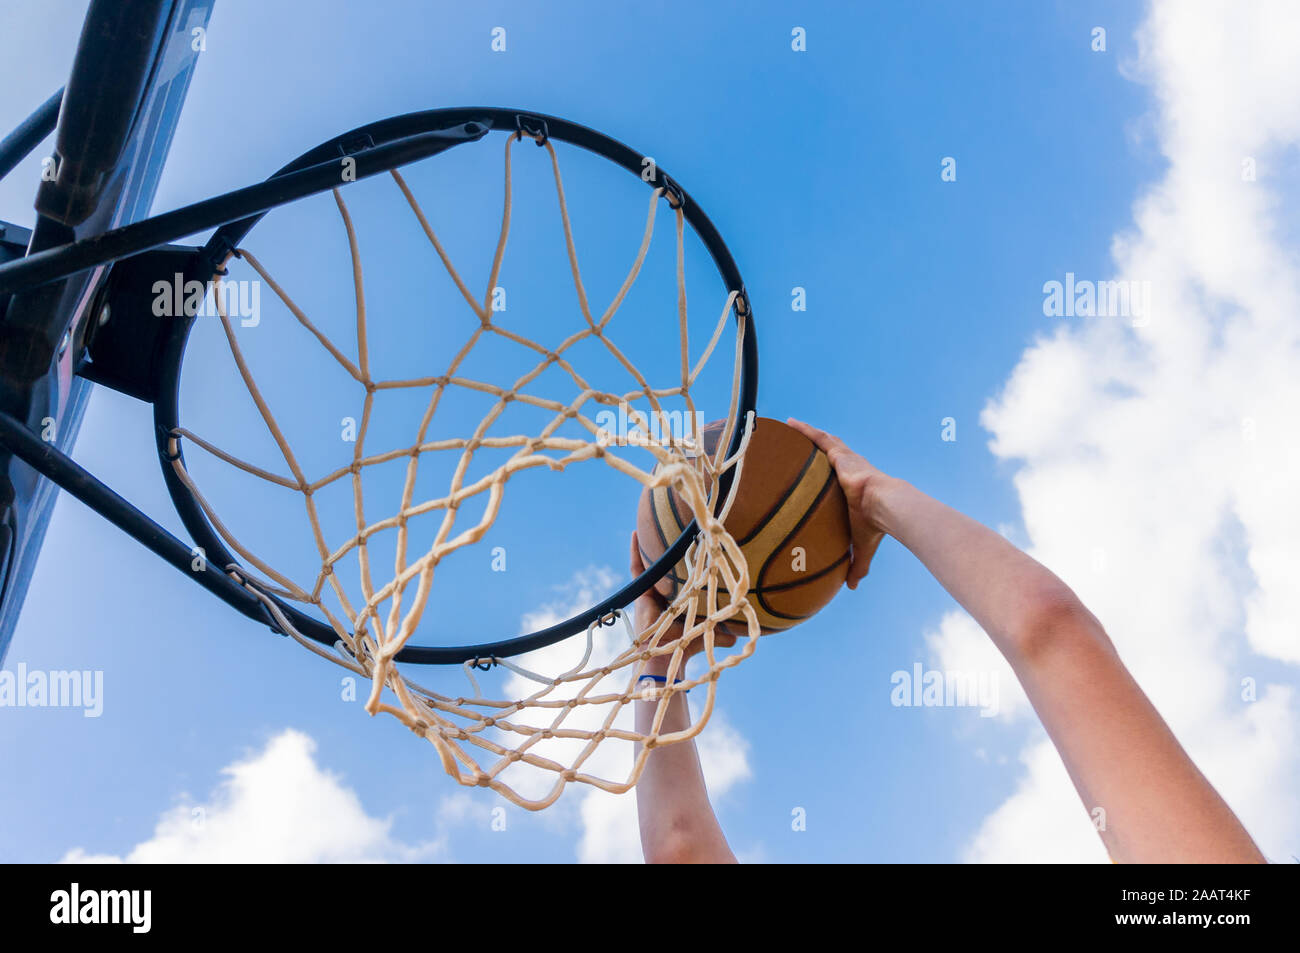 Young boy making a slam dunk in street basketball with blue sky and white  clouds Stock Photo - Alamy